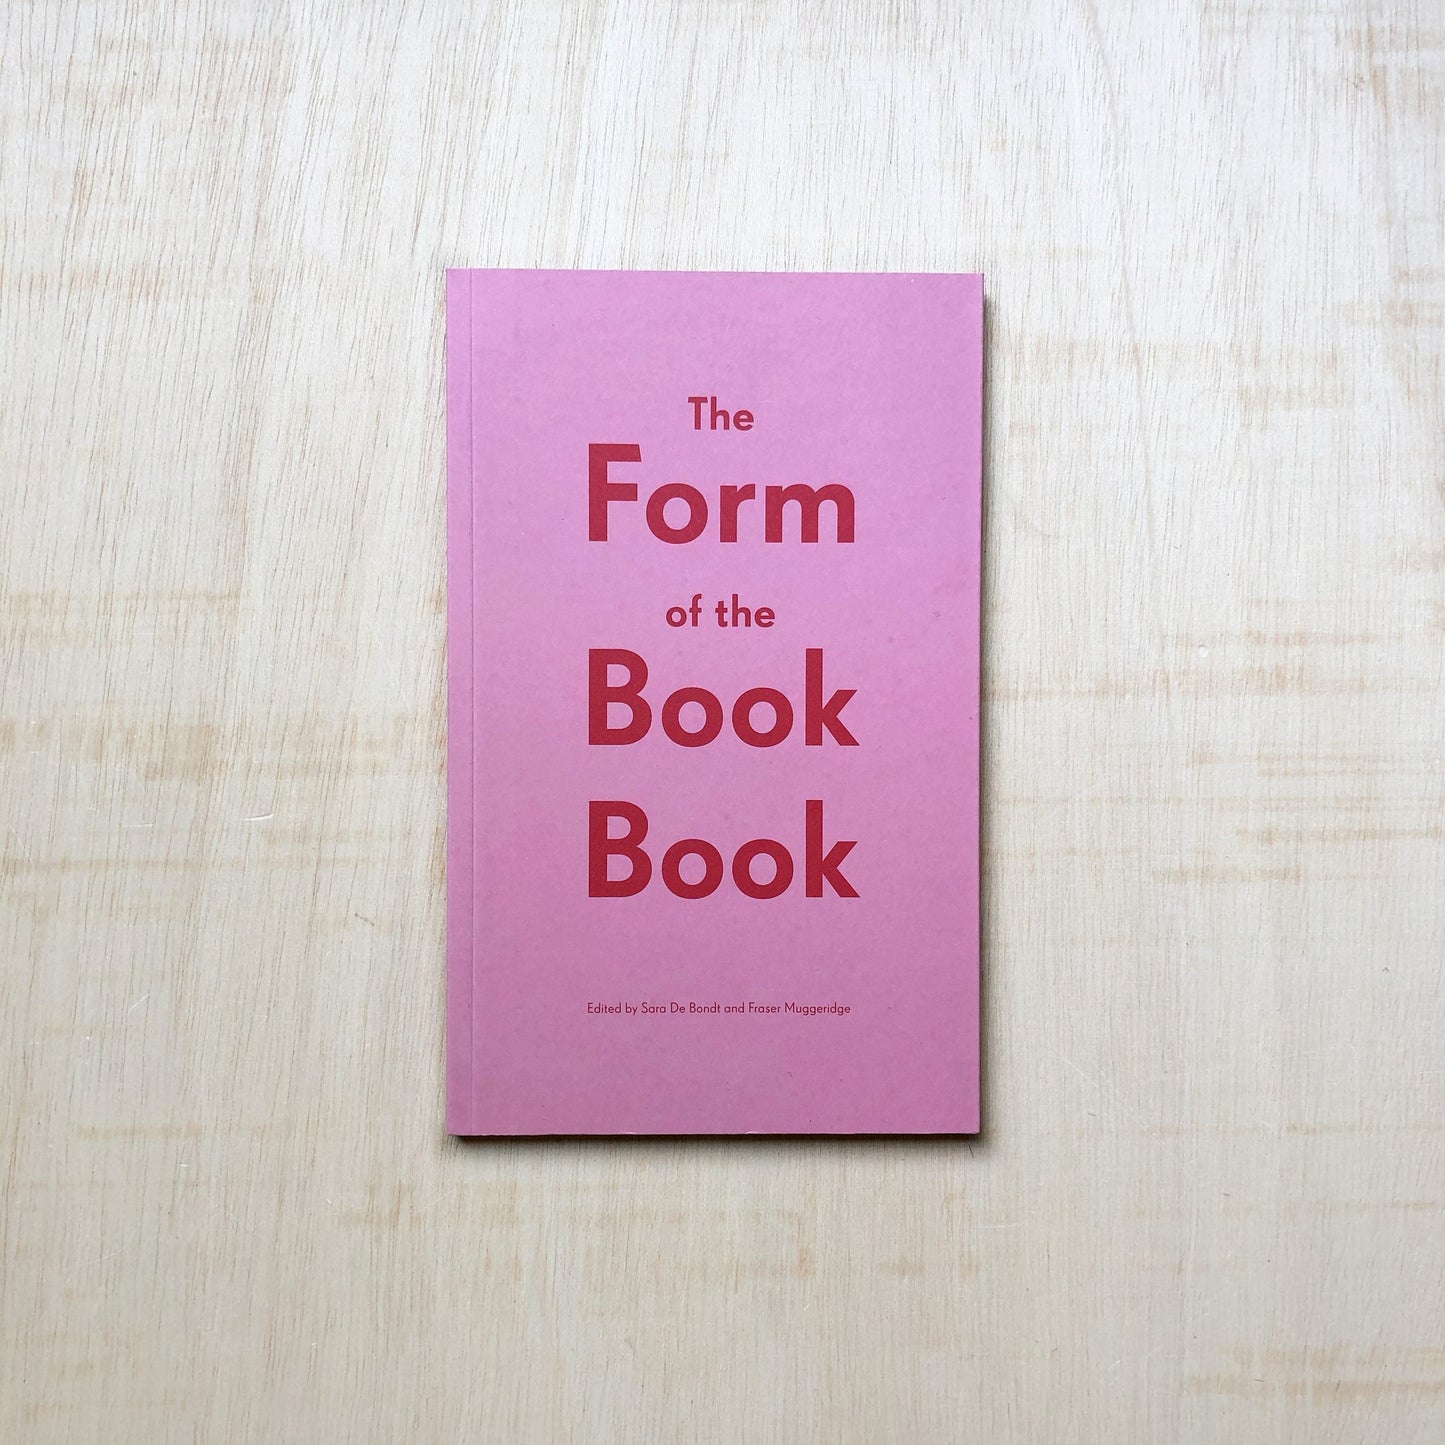 The Form of the Book